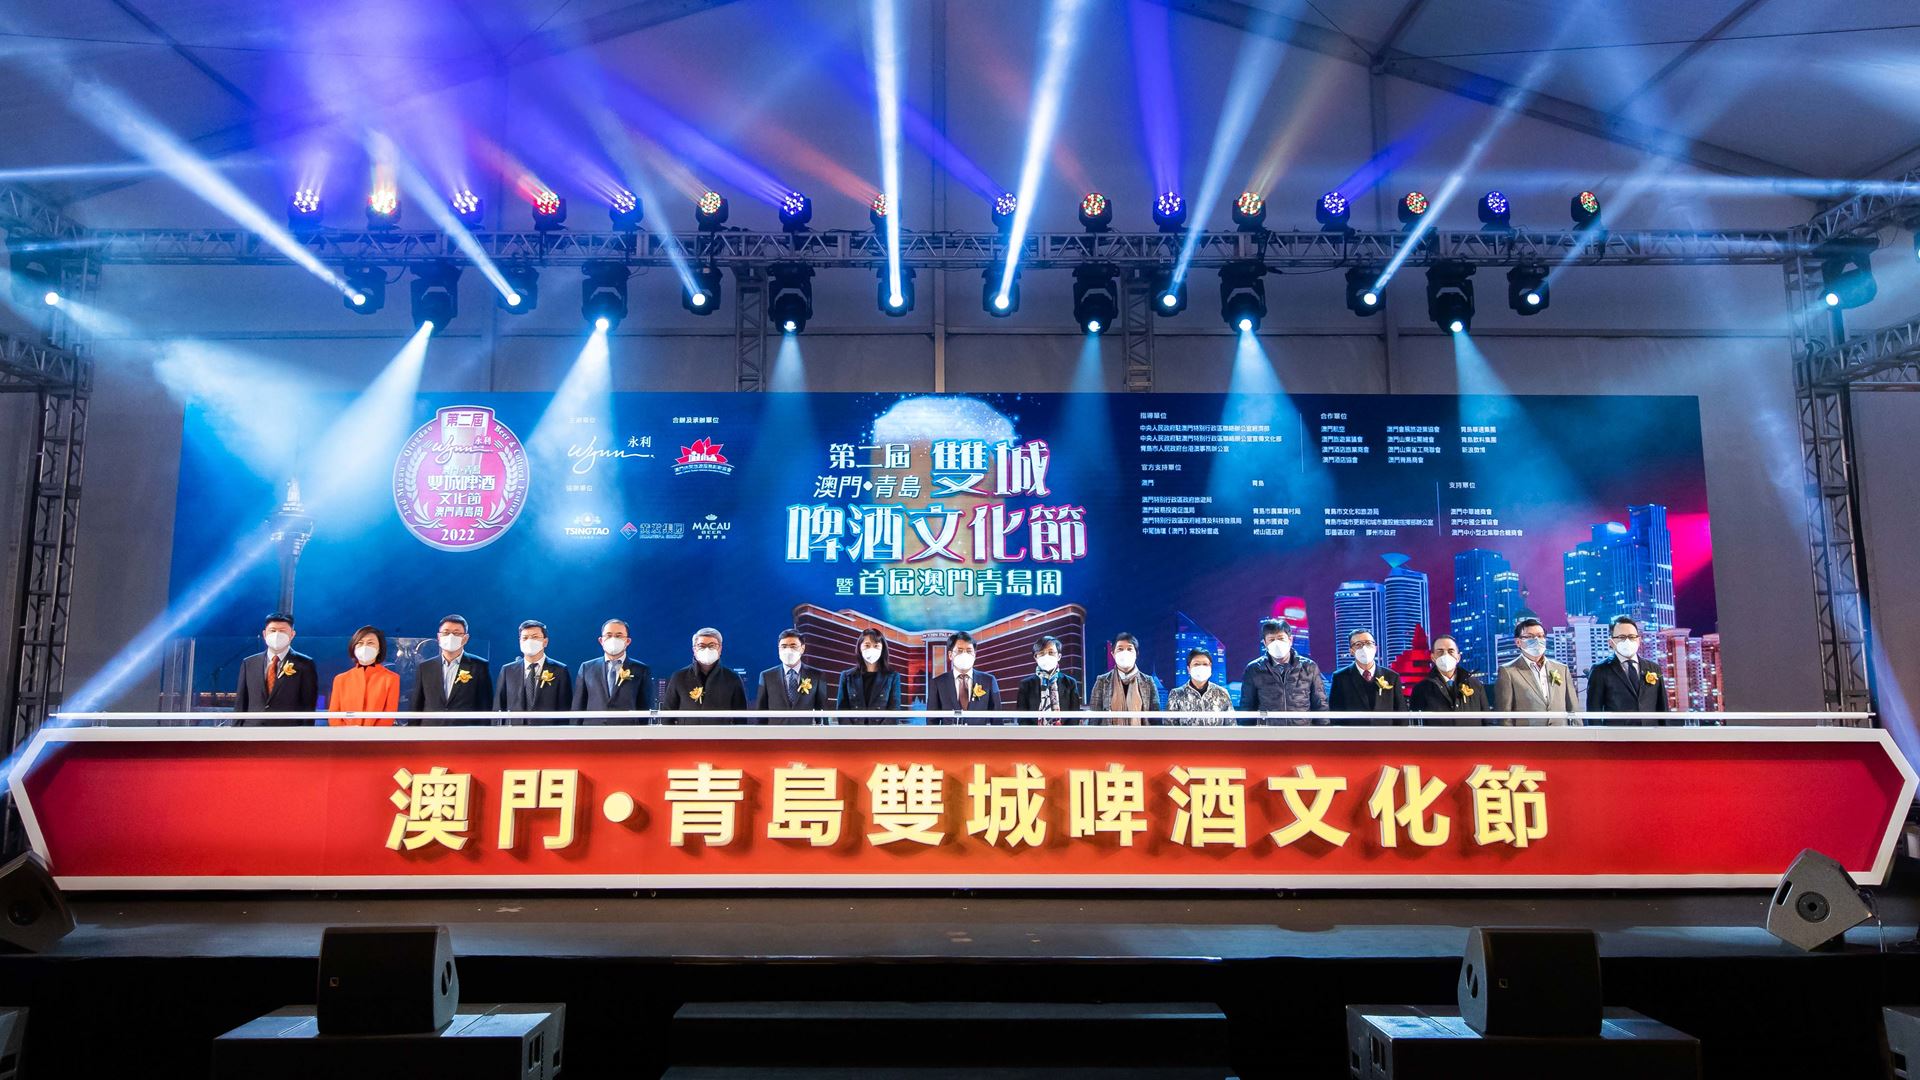 "The 2nd Macau-Qingdao Beer & Cultural Festival and the 1st Macau-Qingdao Week" toast to the Opening Ceremony